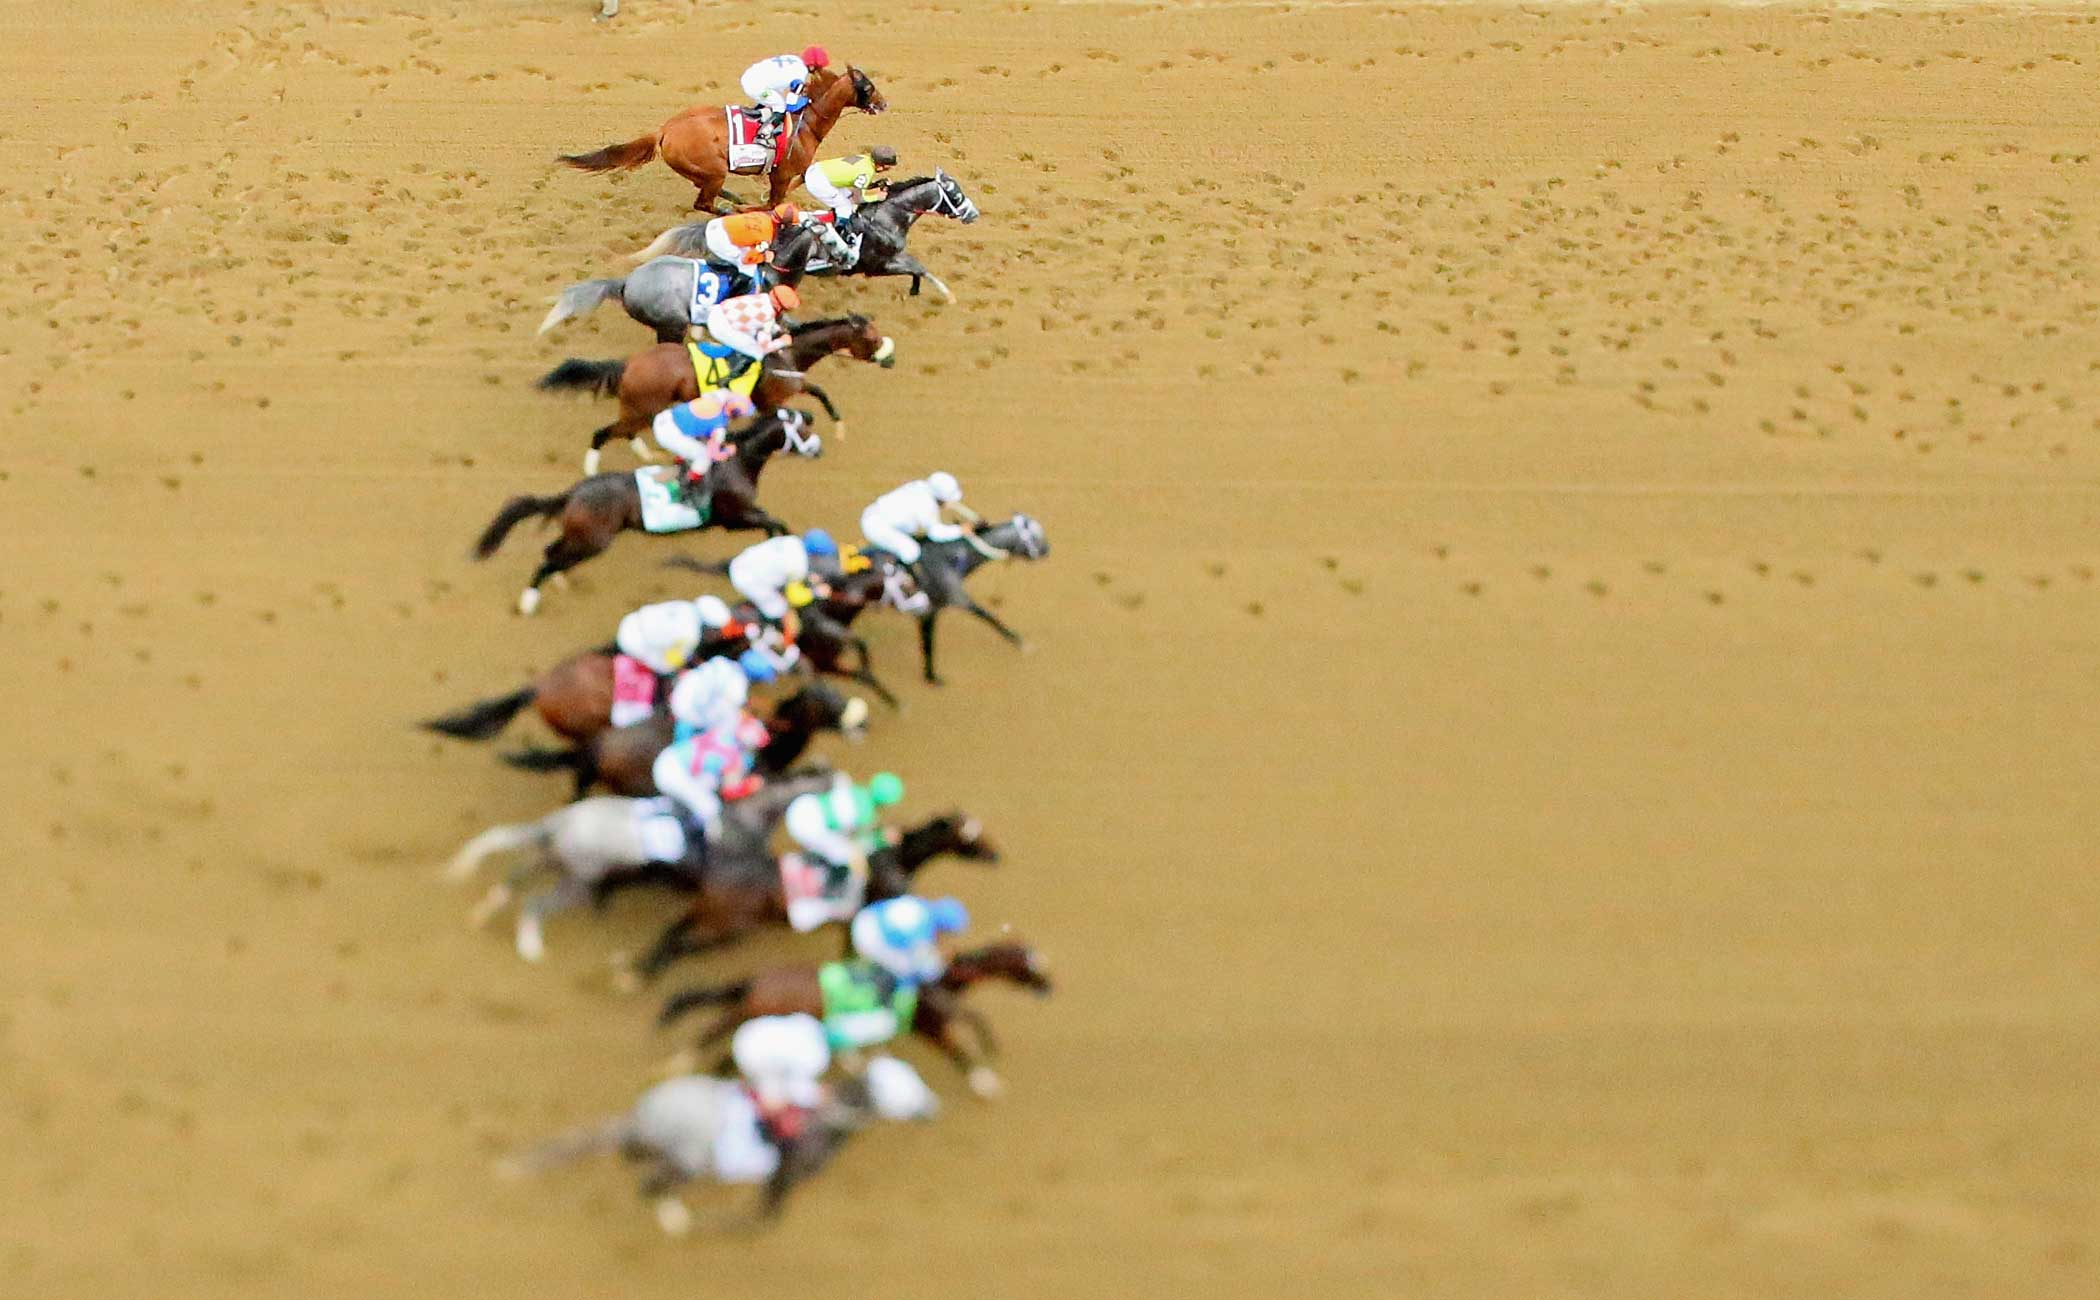 The field races at the start of The 148th running of the Belmont Stakes at Belmont Park on June 11, 2016 in Elmont, New York.